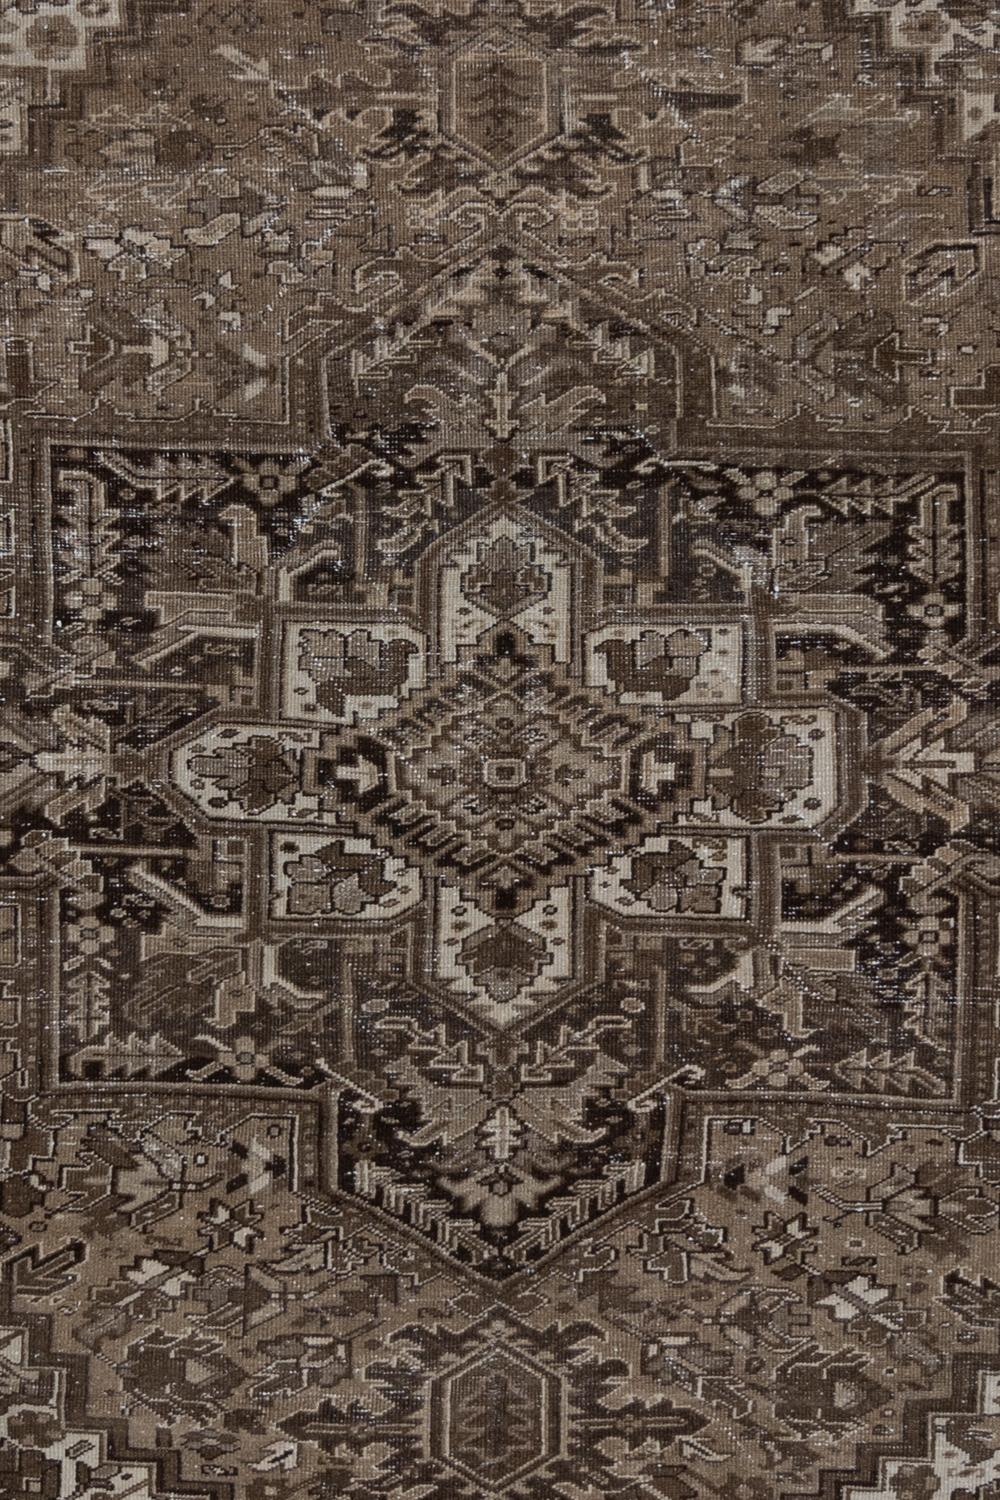 Age: Circa 1930

Colors: brown, taupe, black, off white

Pile: low

Wear Notes: 1

Material: wool on cotton

Vintage rugs are made by hand over the course of months, sometimes years. Their imperfections and wear are evidence of the hard